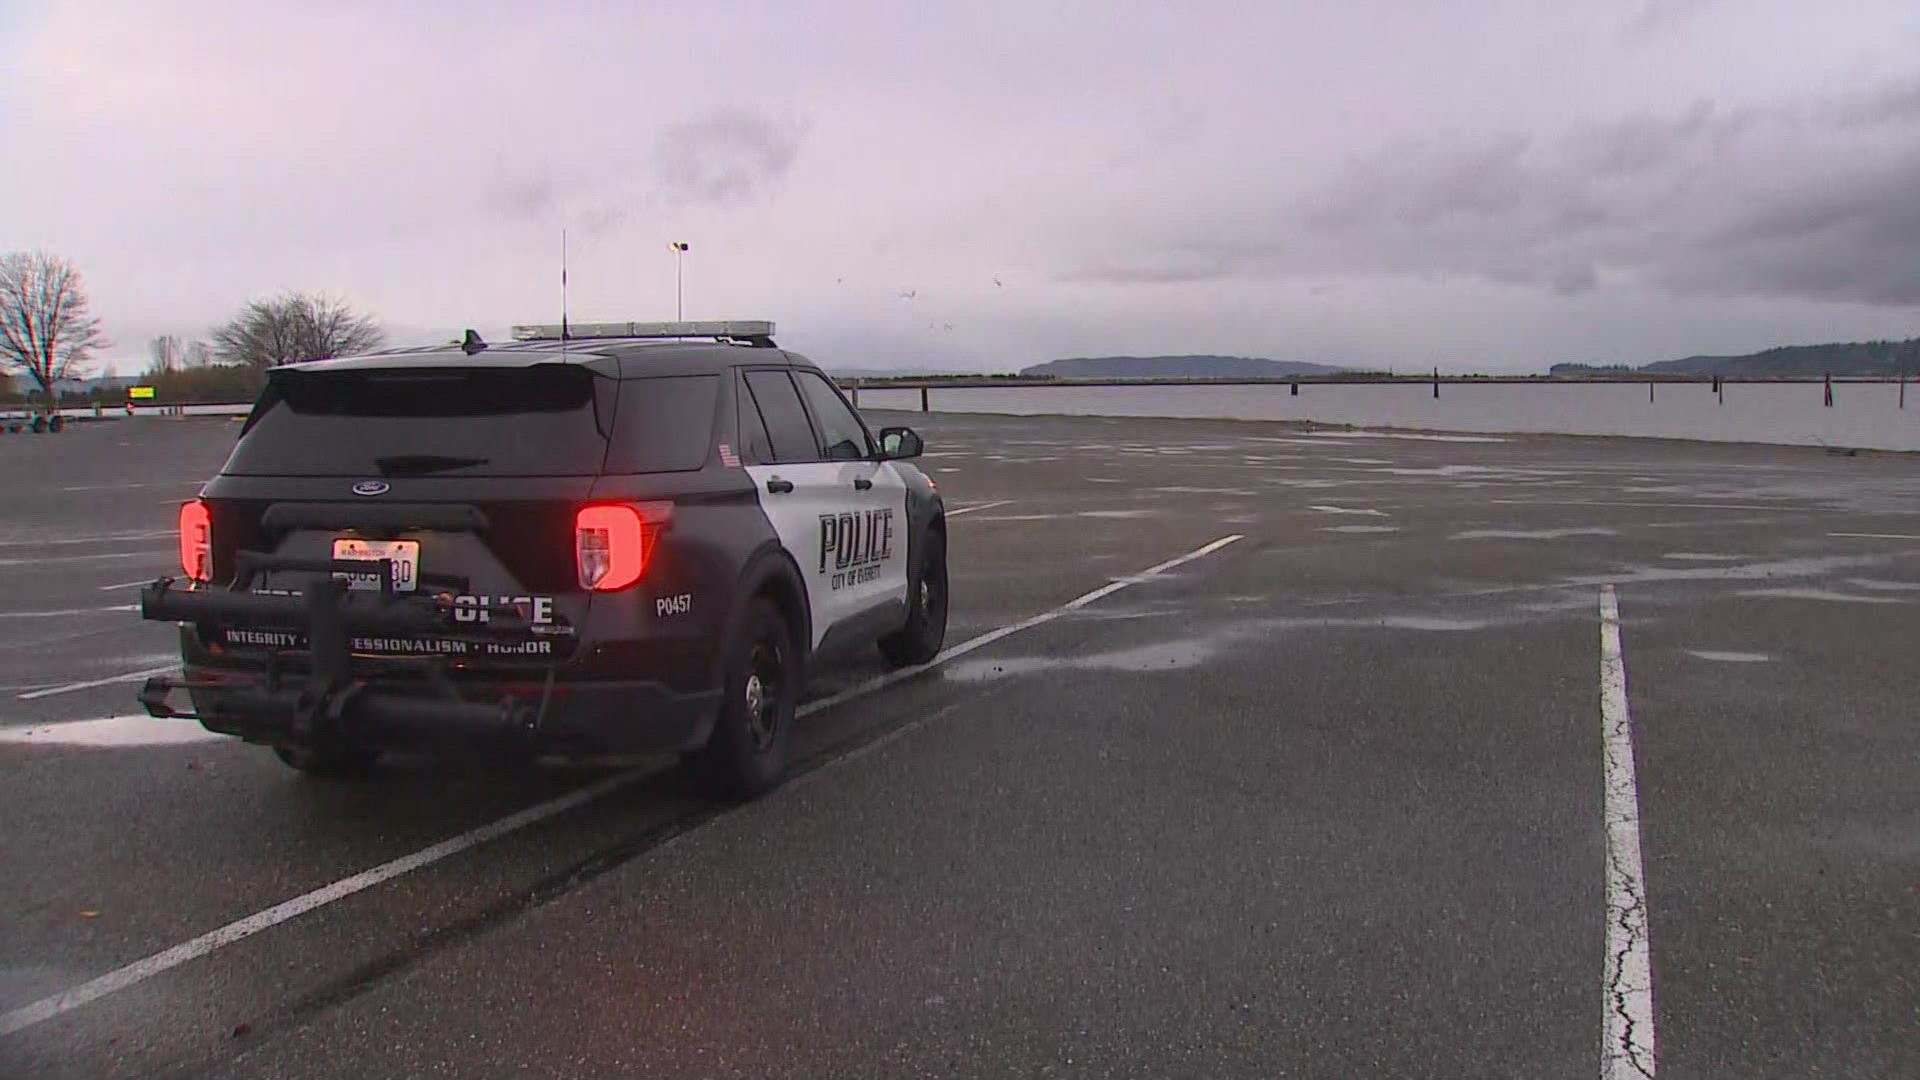 The kayaker went missing near Jetty Island in Everett on Tuesday.